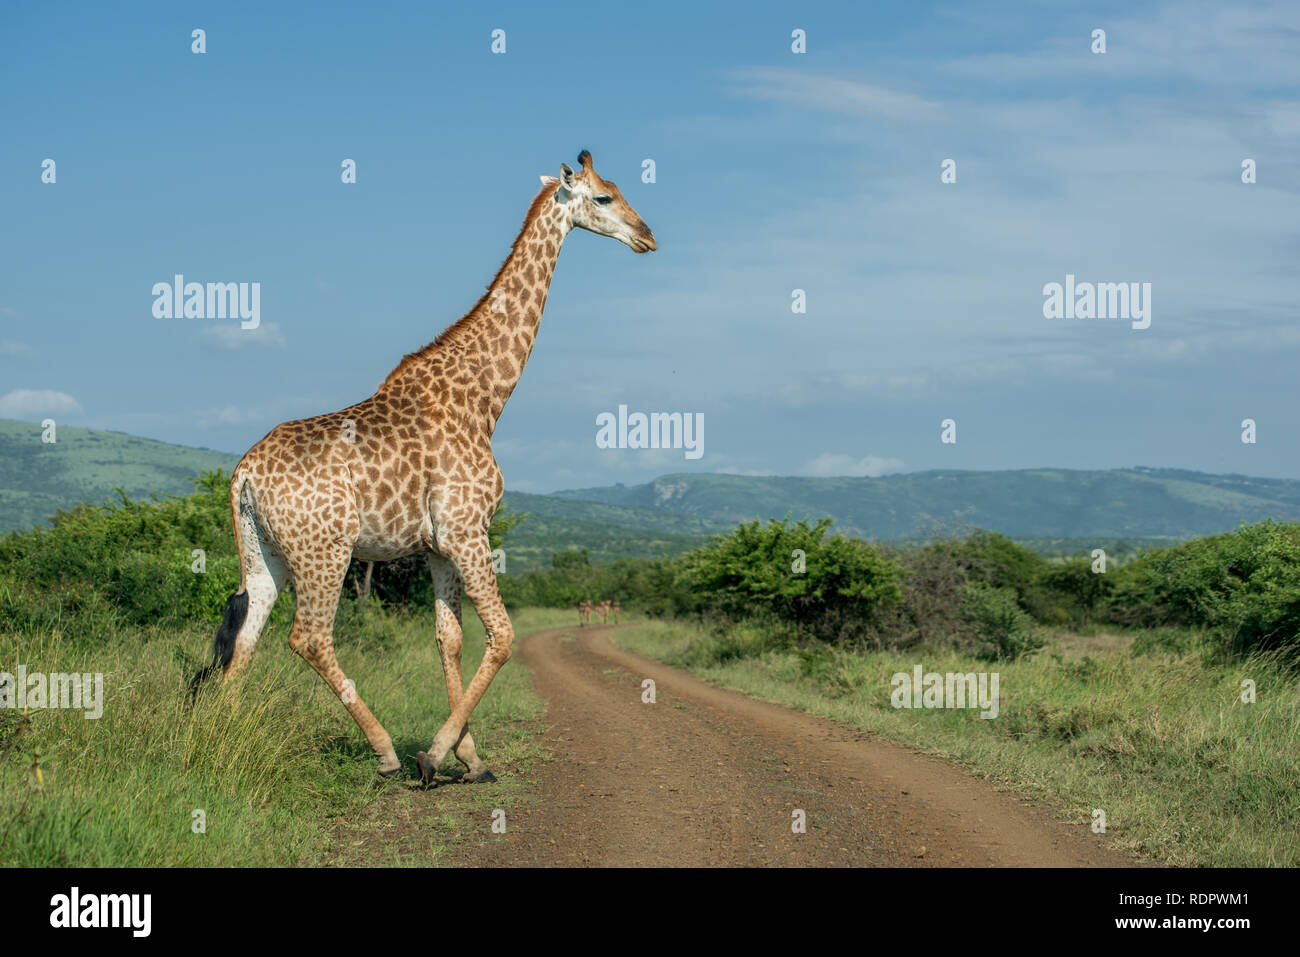 A giraffe crosses a dirt road on a sunny day in Umkhuze Game Reserve, Isimangaliso Wetland Park, KZN, South Africa Stock Photo